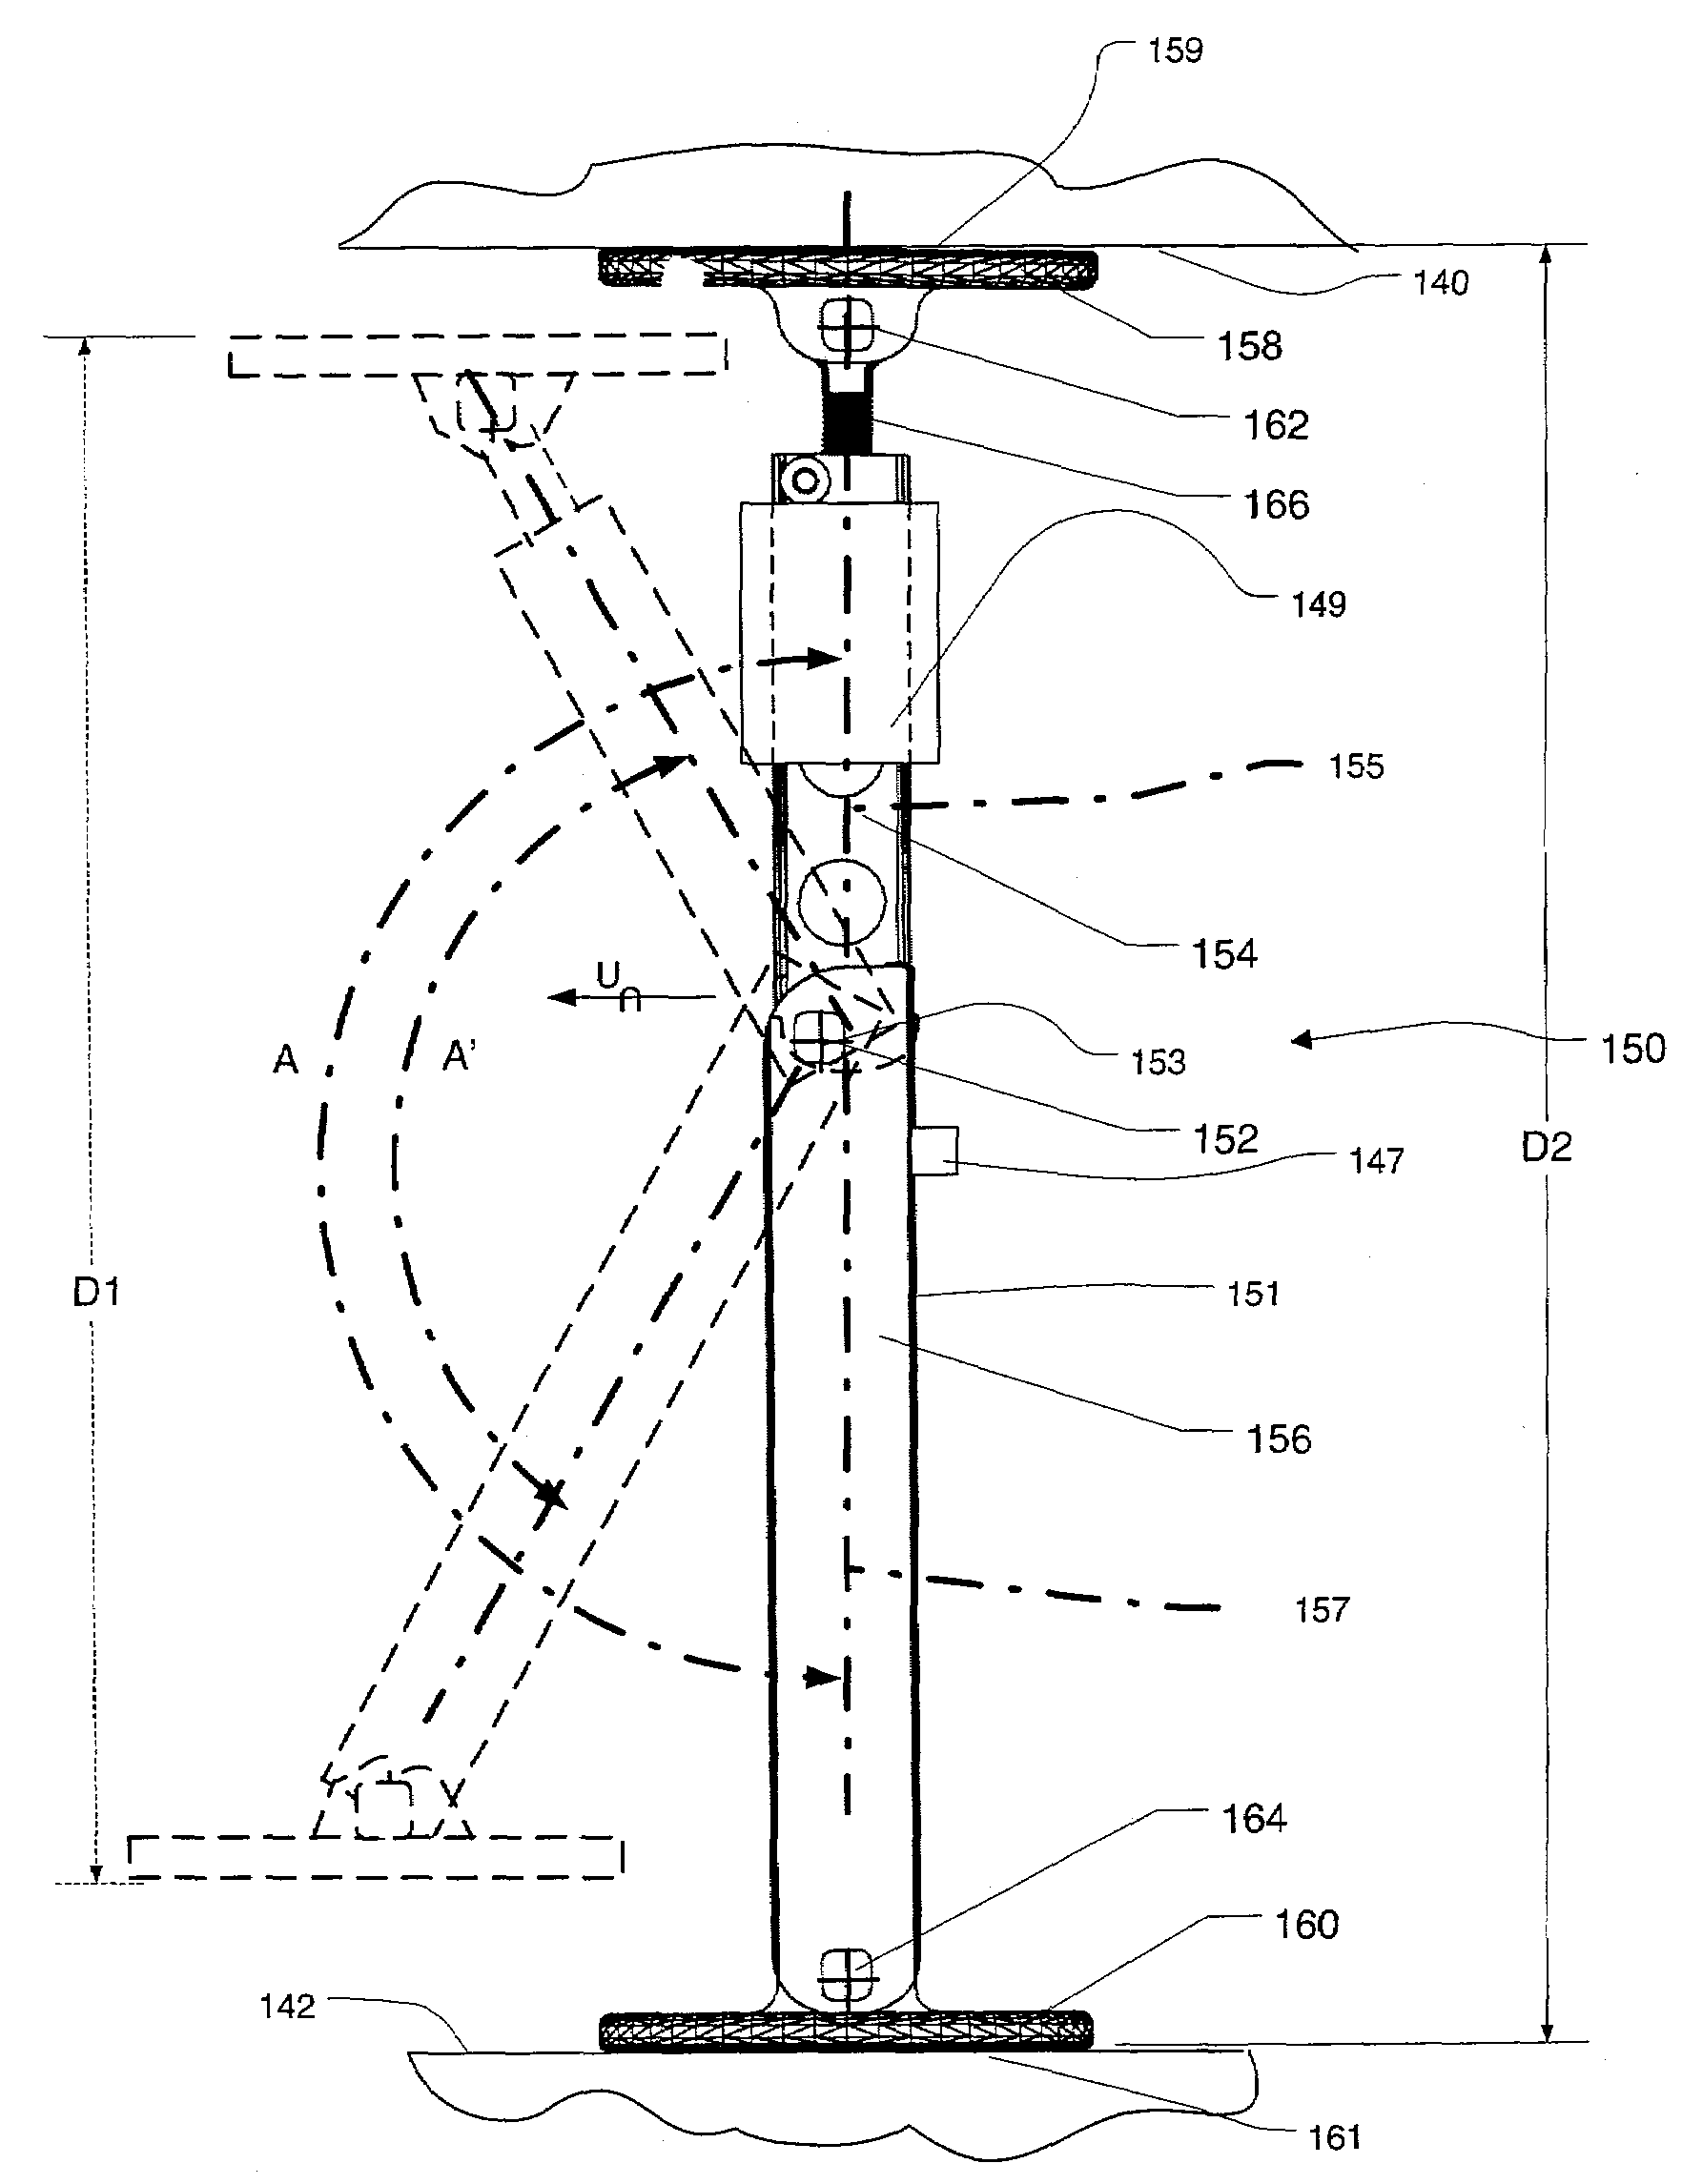 Magnetic resonance imaging system including a transpolar fixture